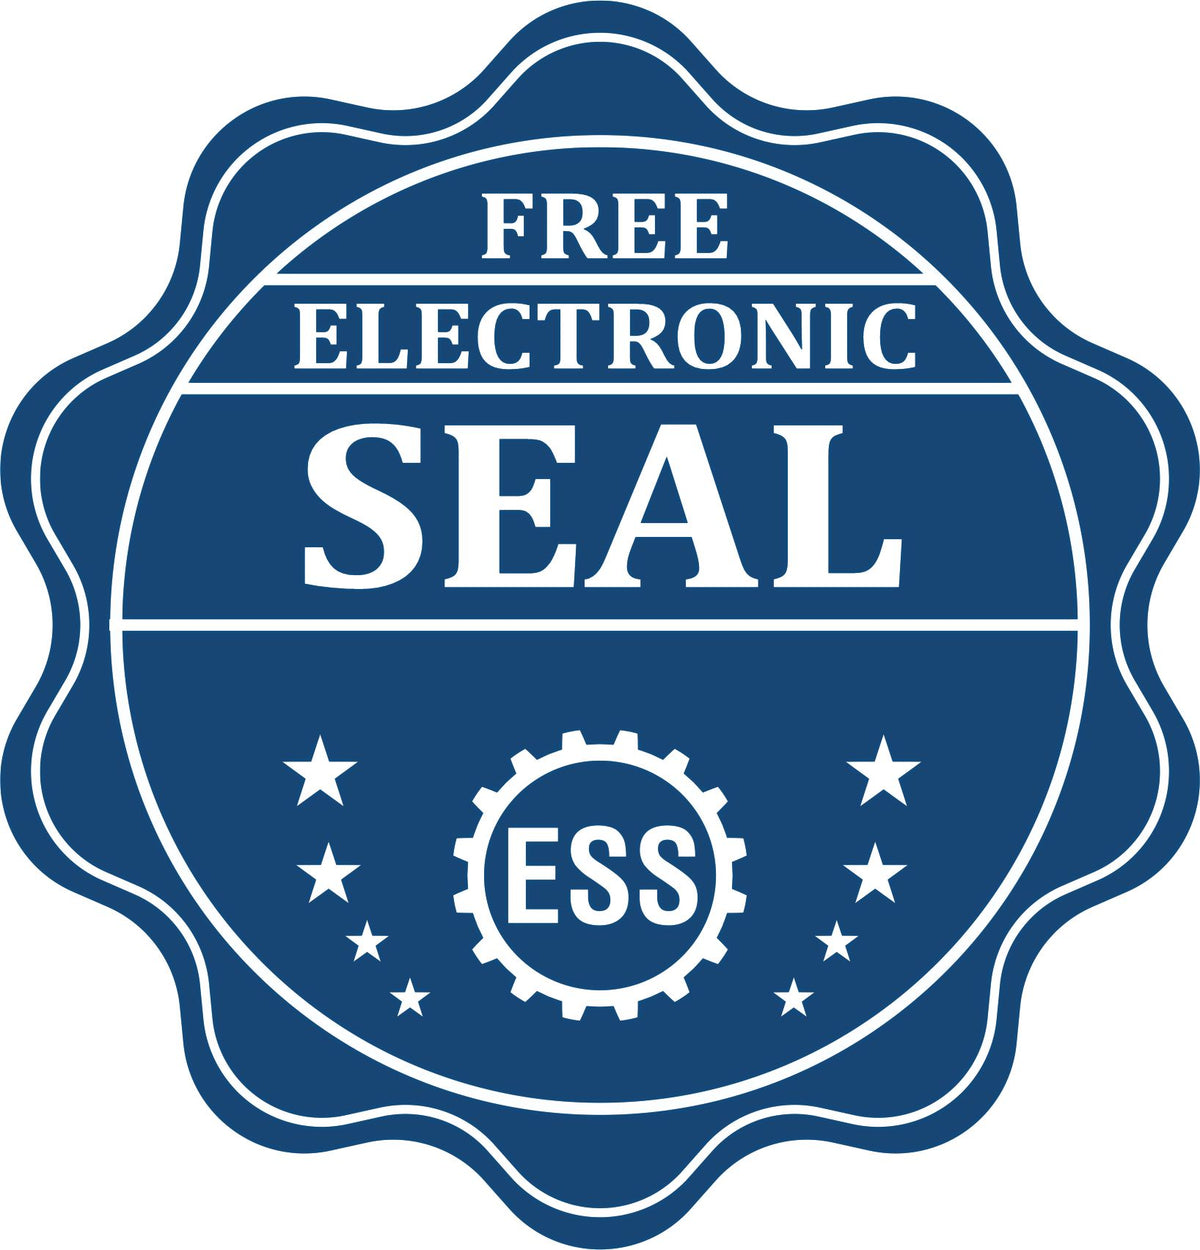 A badge showing a free electronic seal for the Rhode Island Professional Engineer Seal Stamp with stars and the ESS gear on the emblem.